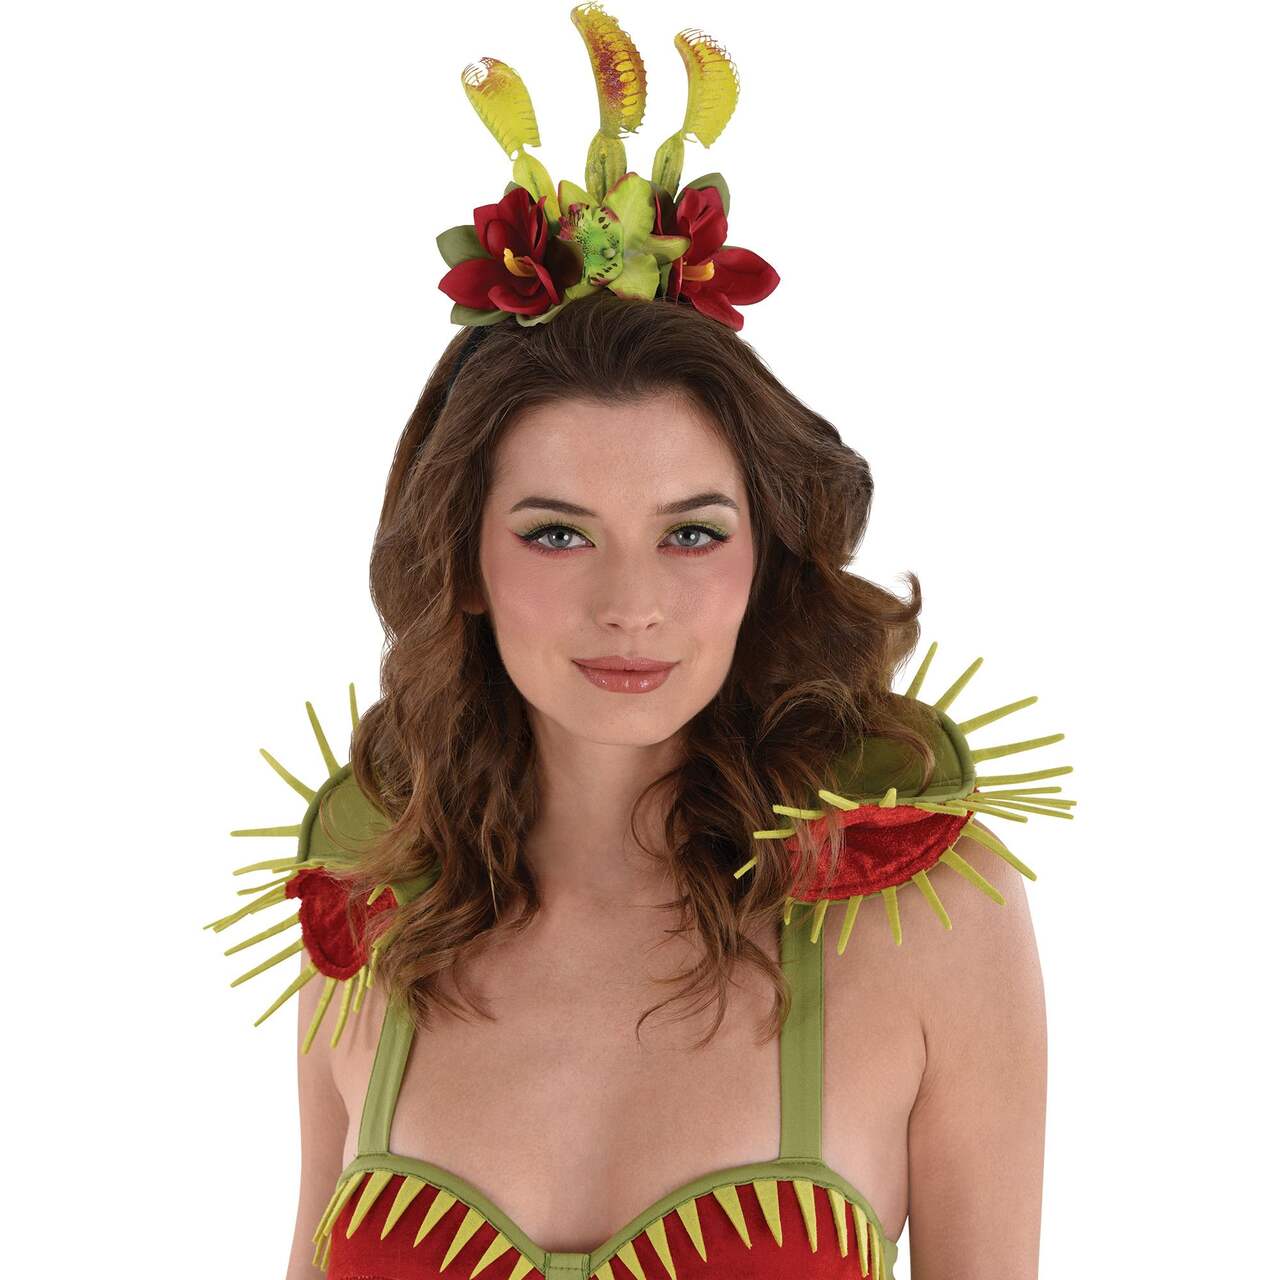 Venus Fly Trap Flower Crown Headband, Green/Red, One Size